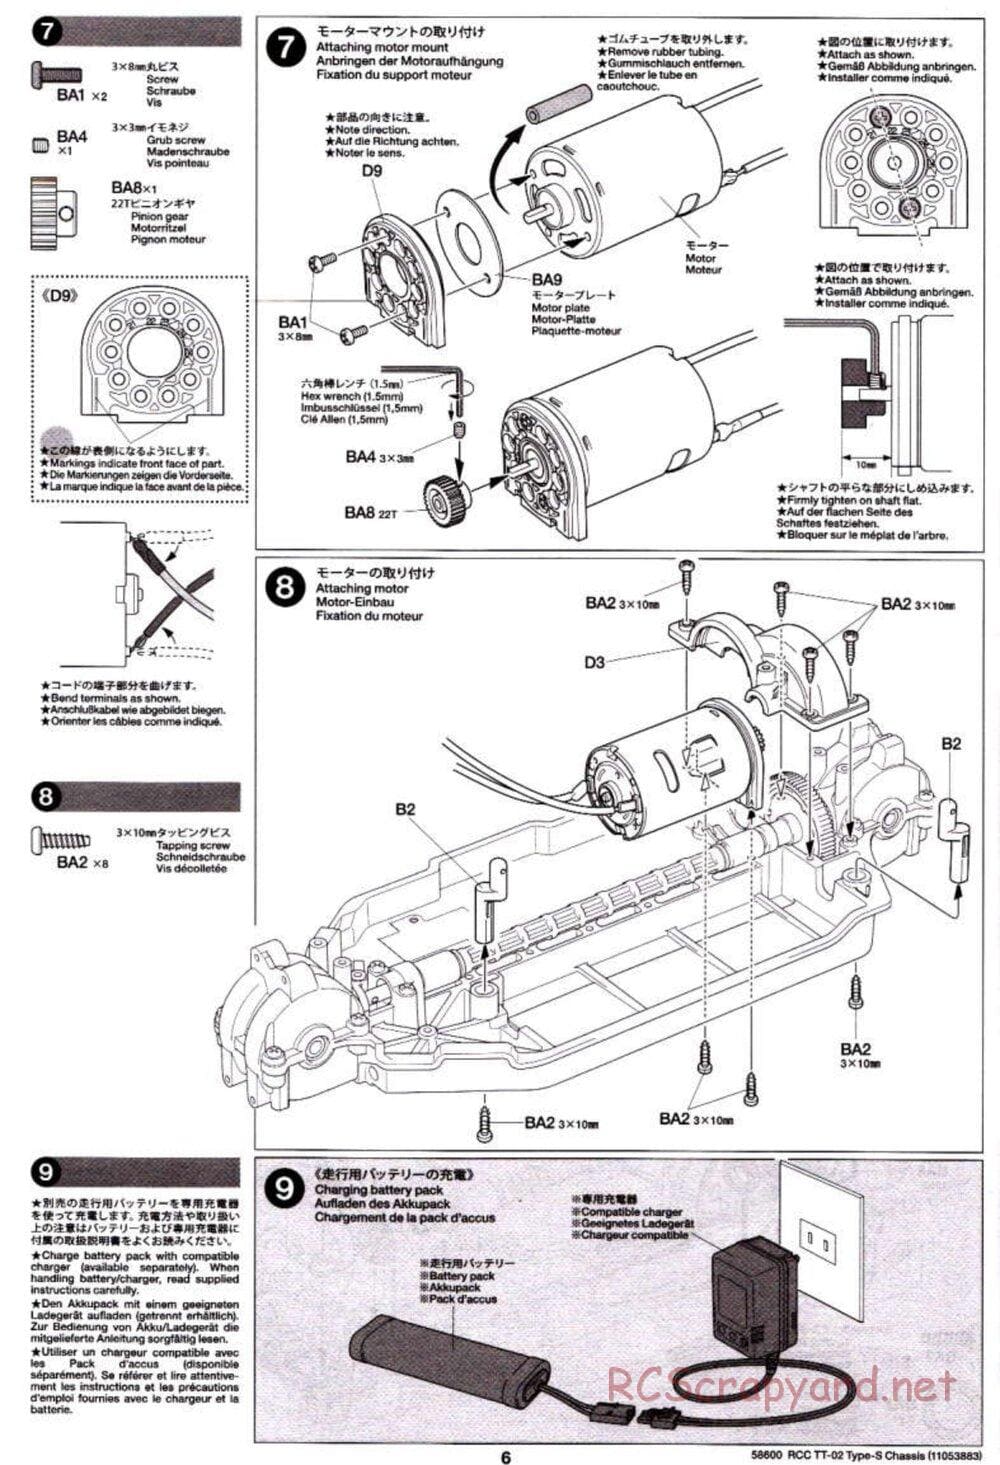 Tamiya - TT-02 Type-S Chassis - Manual - Page 6